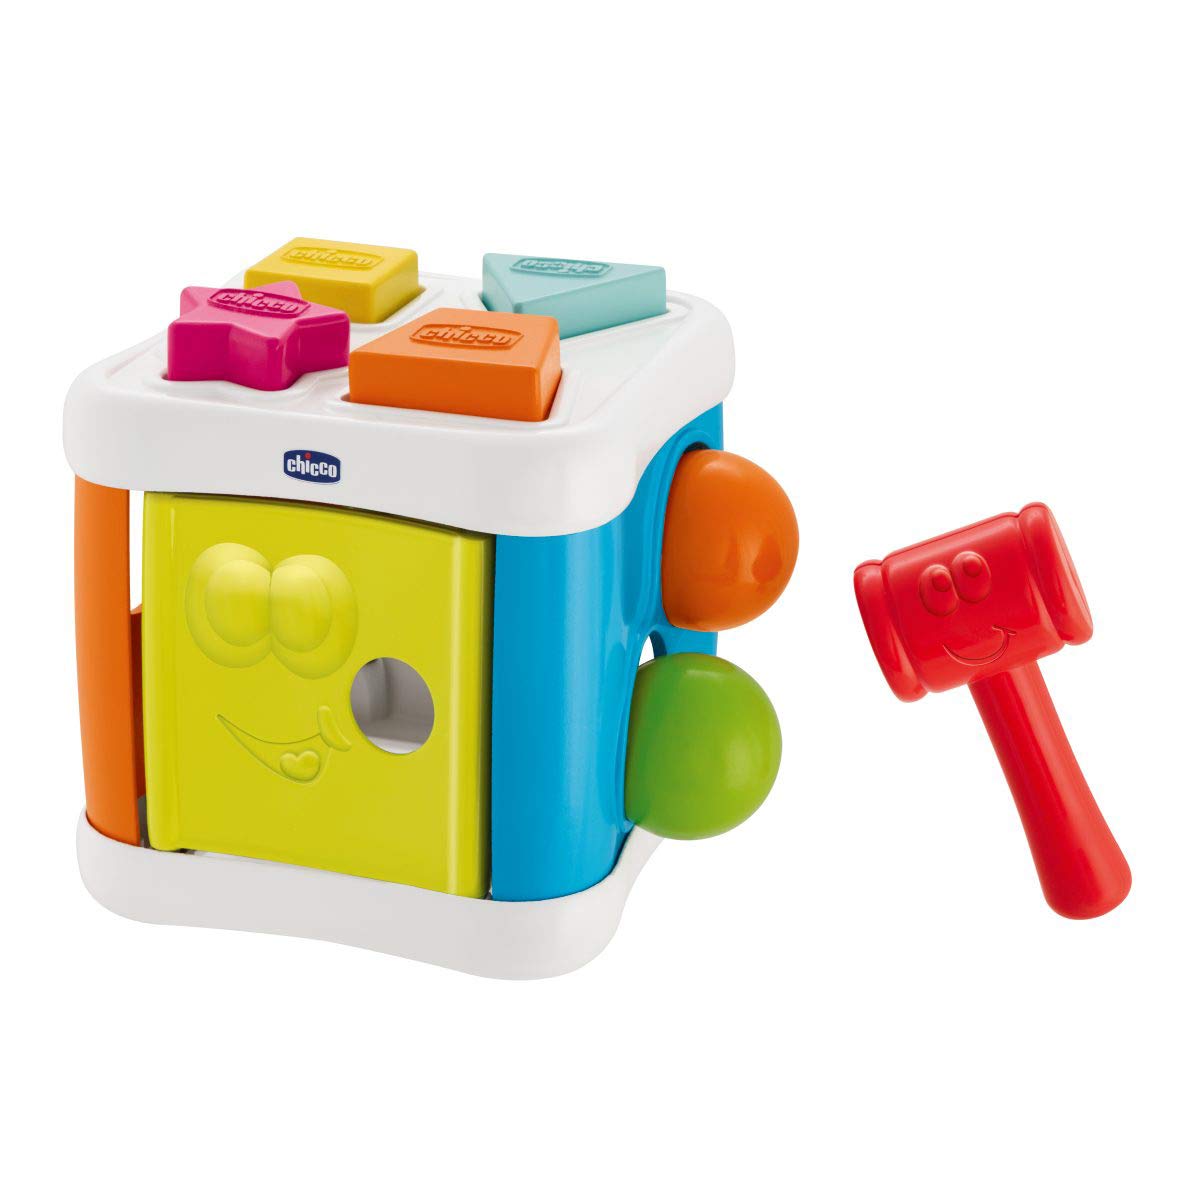 Chicco 0000968600000 2-in-1 Sorting & Punch Cube, Multi-Coloured